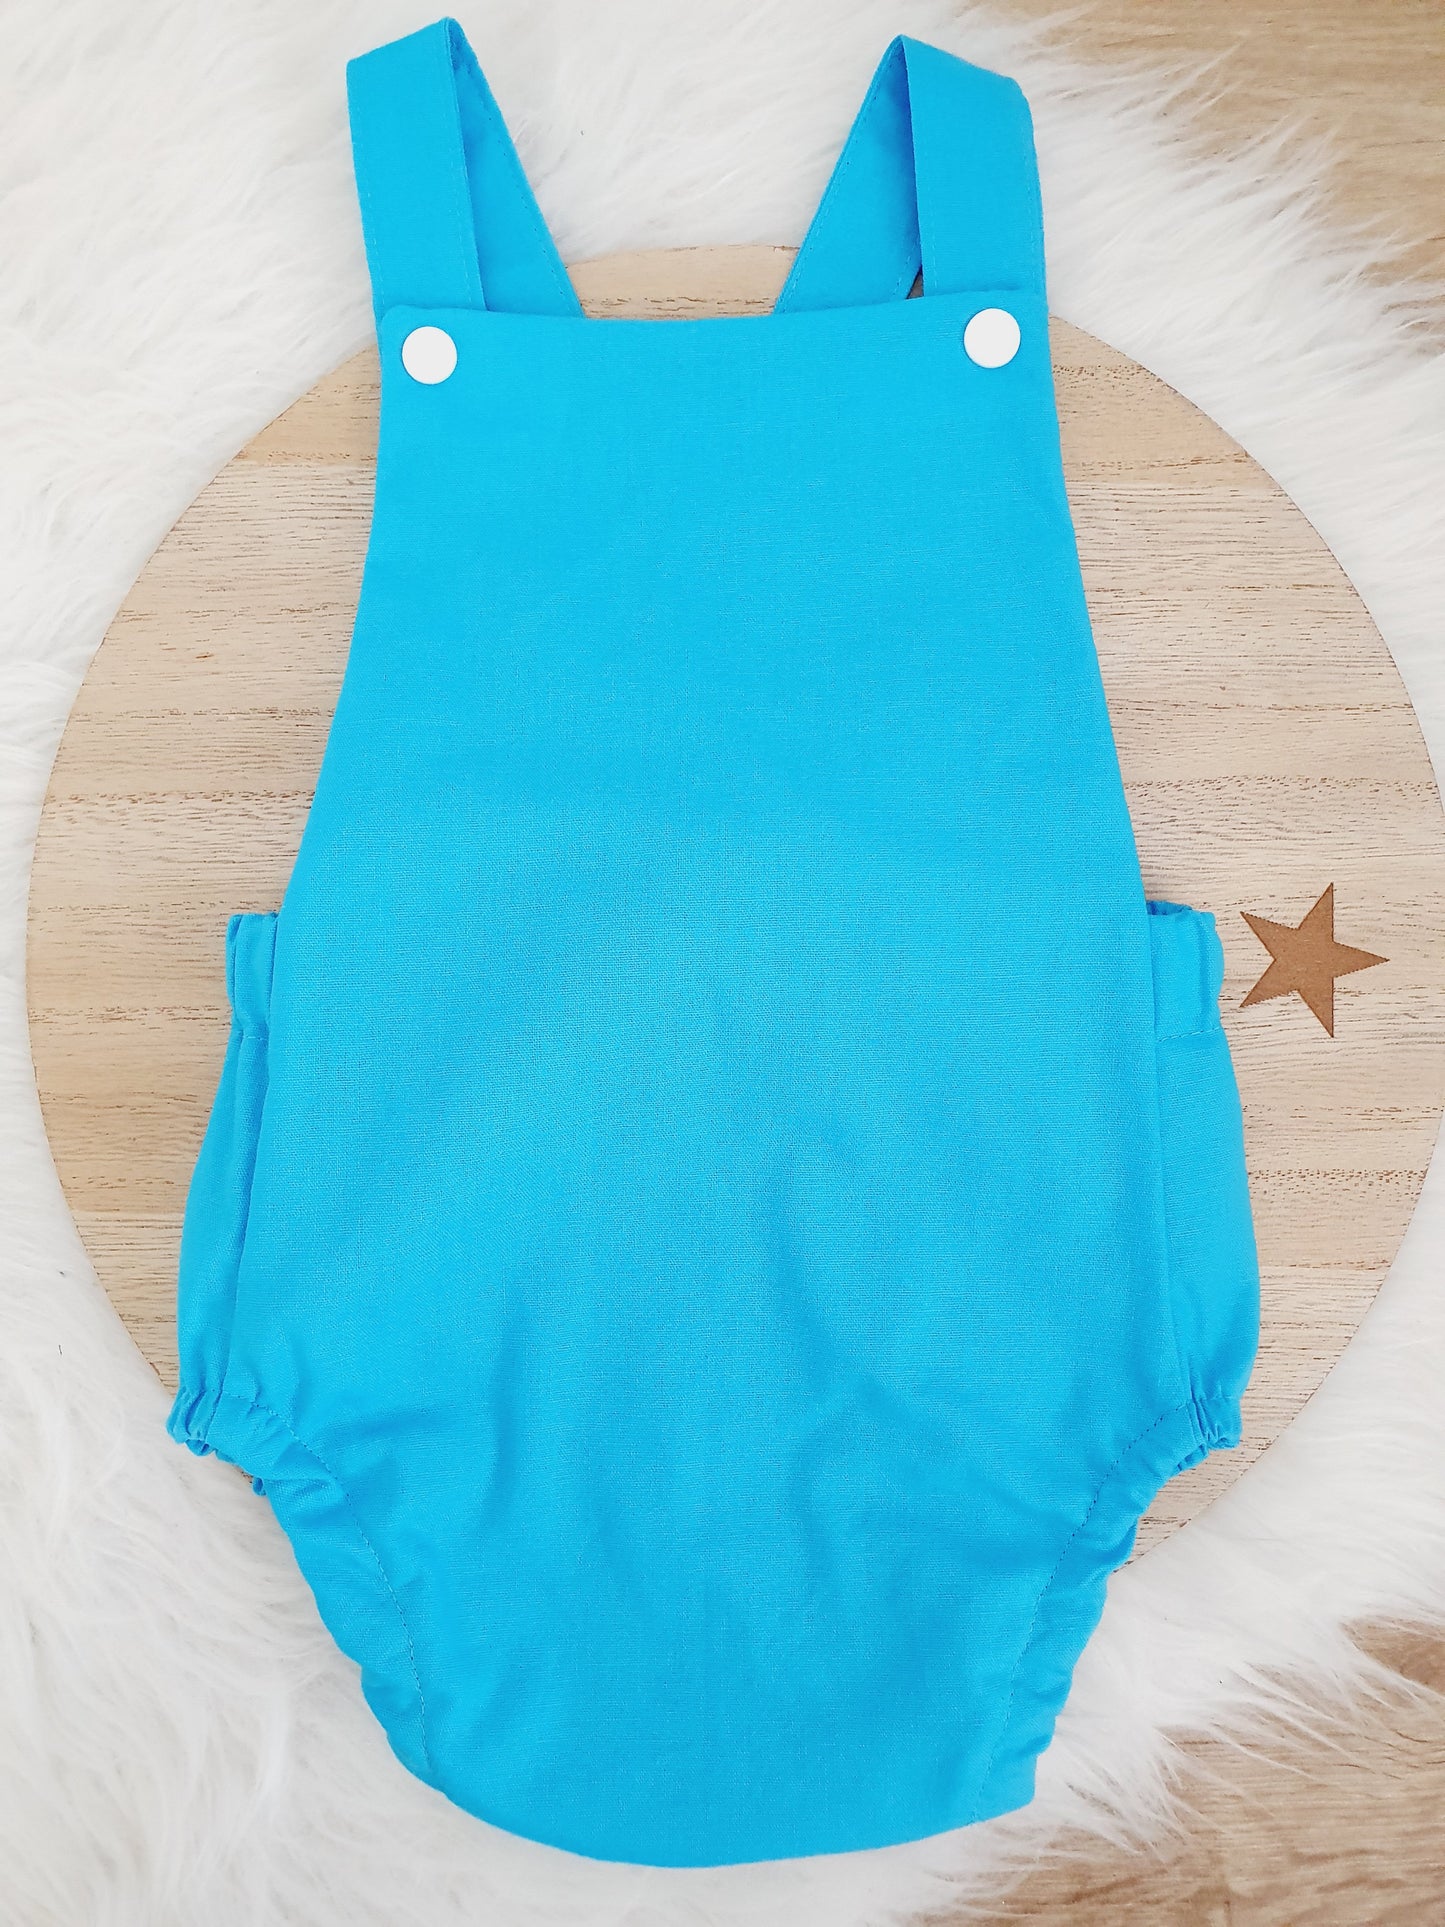 BLUE Baby Romper, Handmade Baby Clothing, Size 0 - 1st Birthday Clothing / Cake Smash Outfit - BRIGHT BLUE, 9 - 12 months